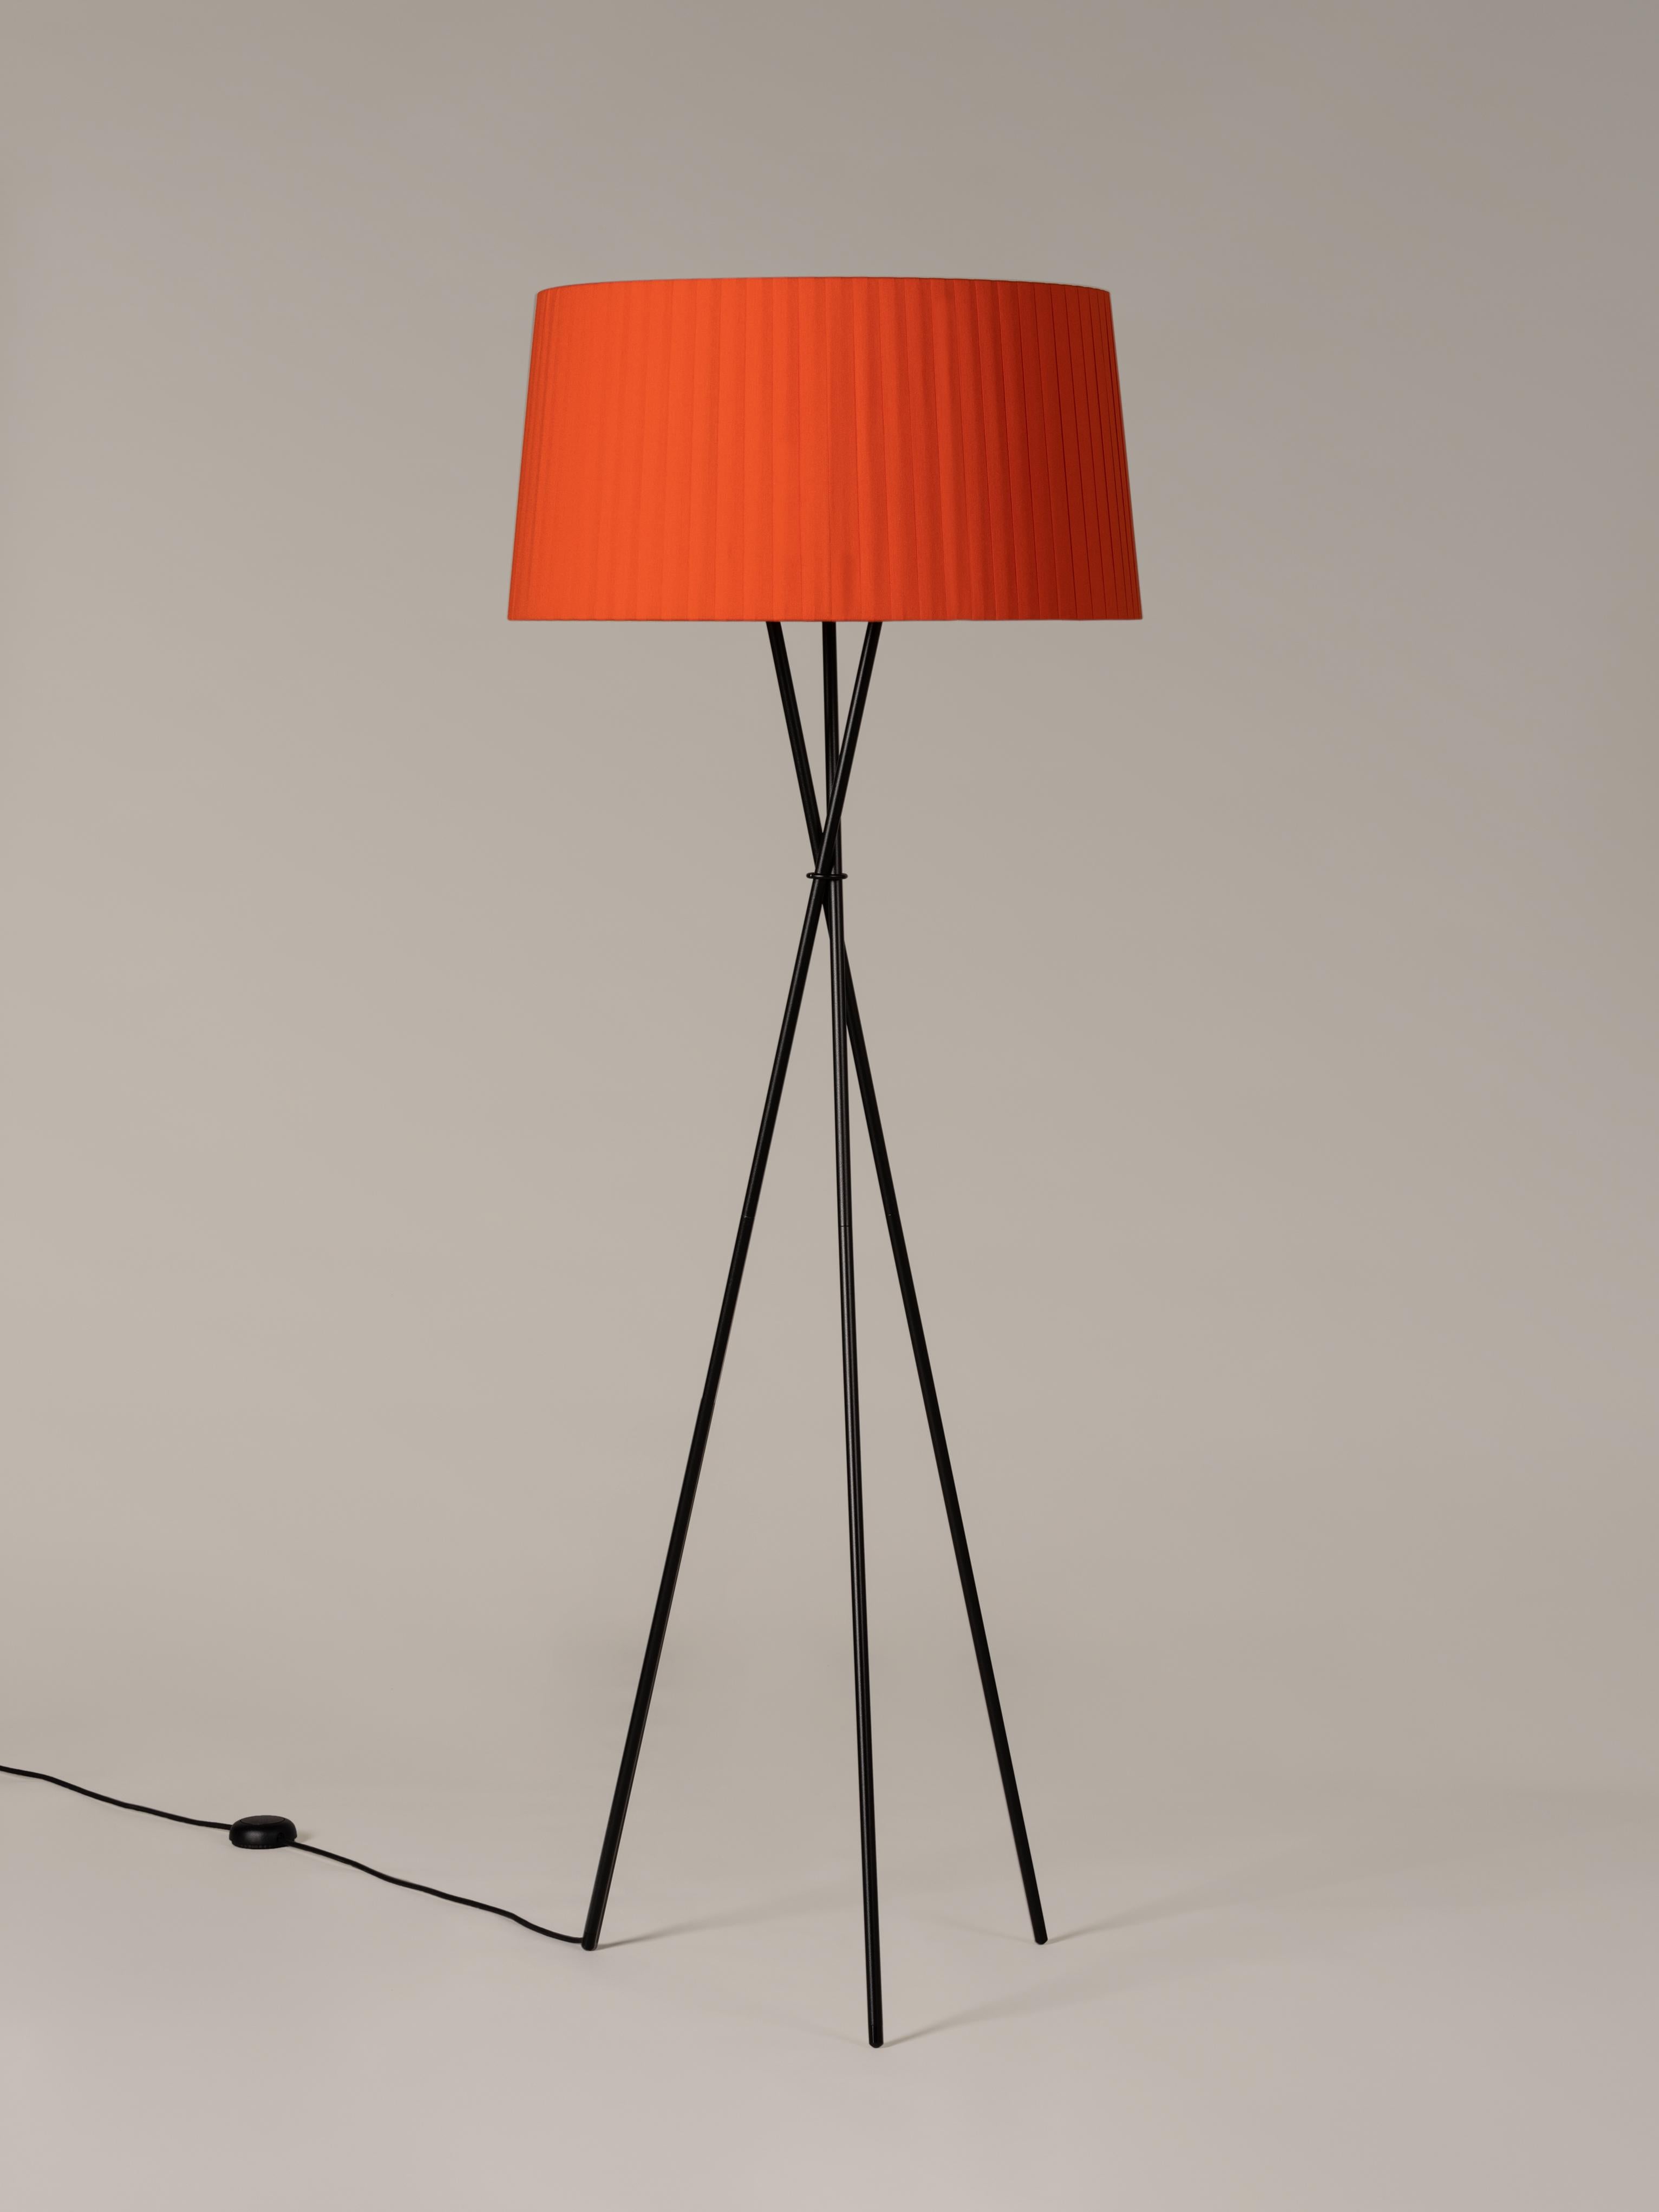 Red Trípode G5 floor lamp by Santa & Cole
Dimensions: D 62 x H 168 cm
Materials: Metal, ribbon.
Available in other colors.

Trípode humanises neutral spaces with its colourful and functional sobriety. The shade is hand ribboned and its base